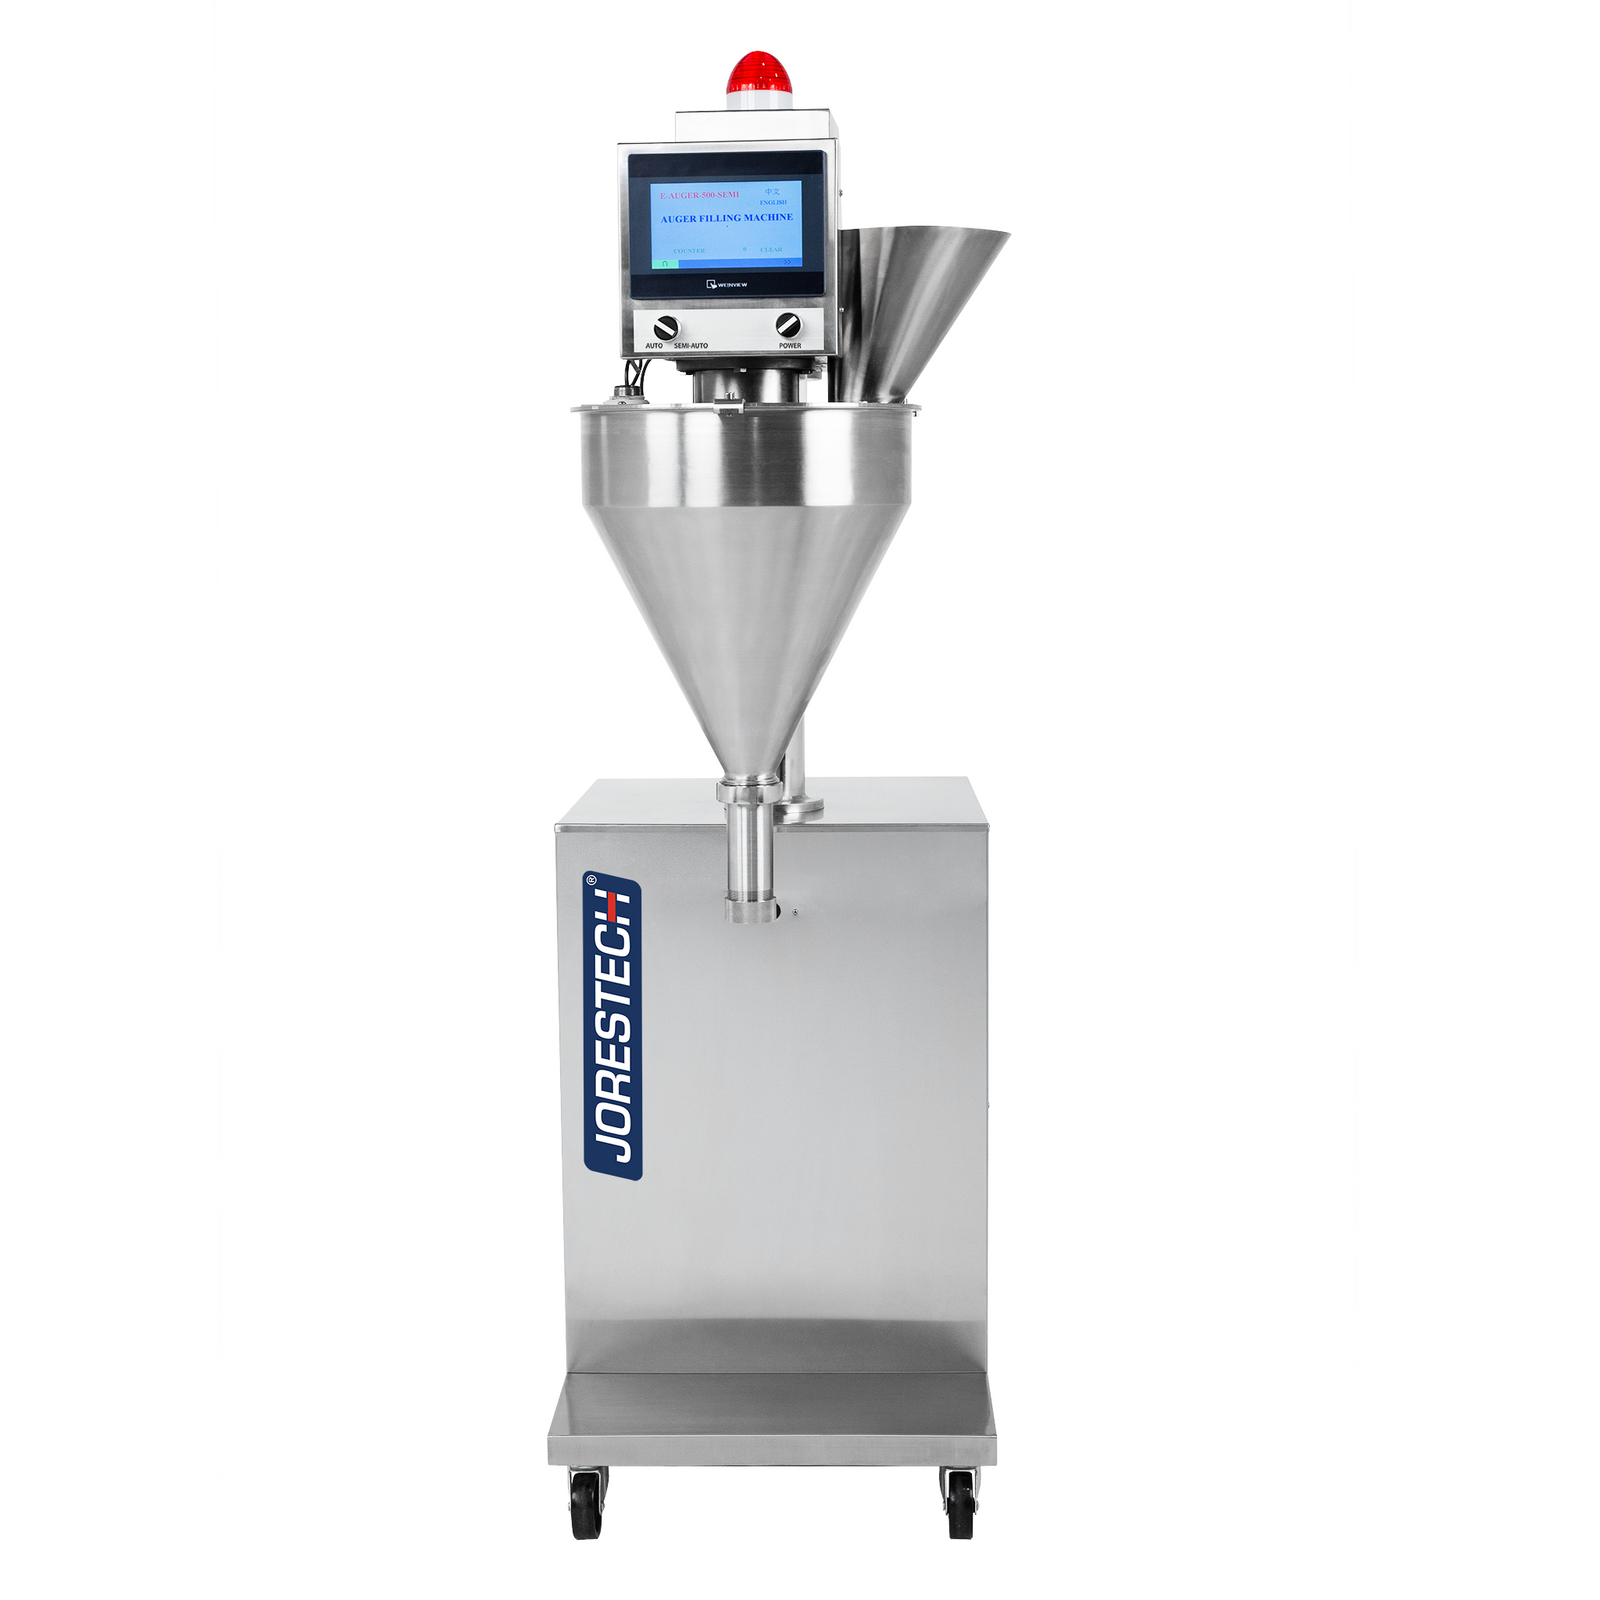 Front view of a stainless steel semi-automatic powder dispensing machine. The machine is turned on and placed over a white background.